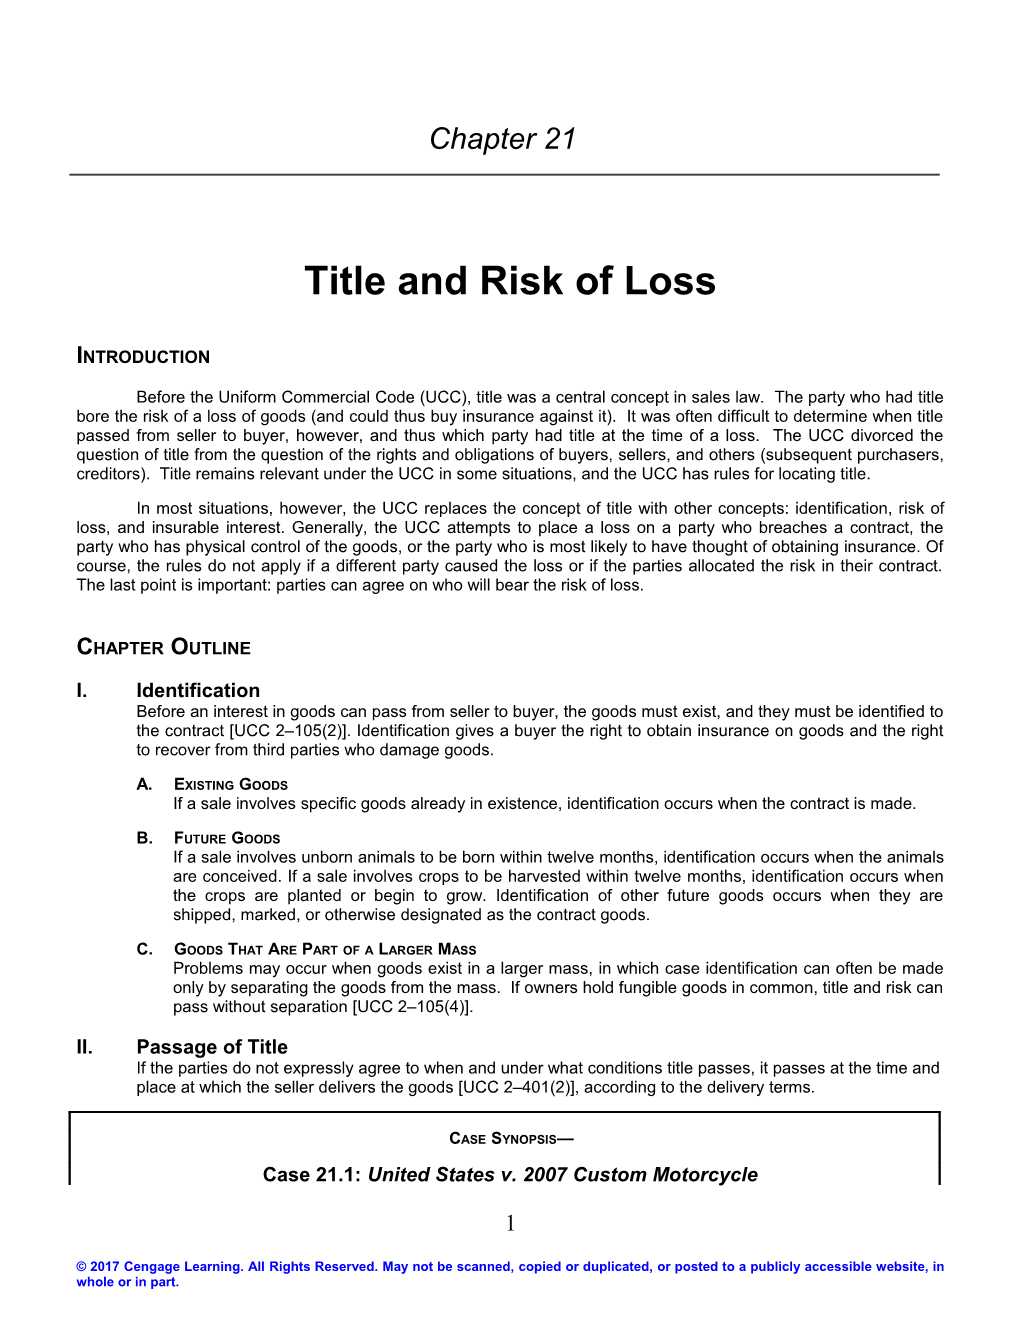 Title and Risk of Loss